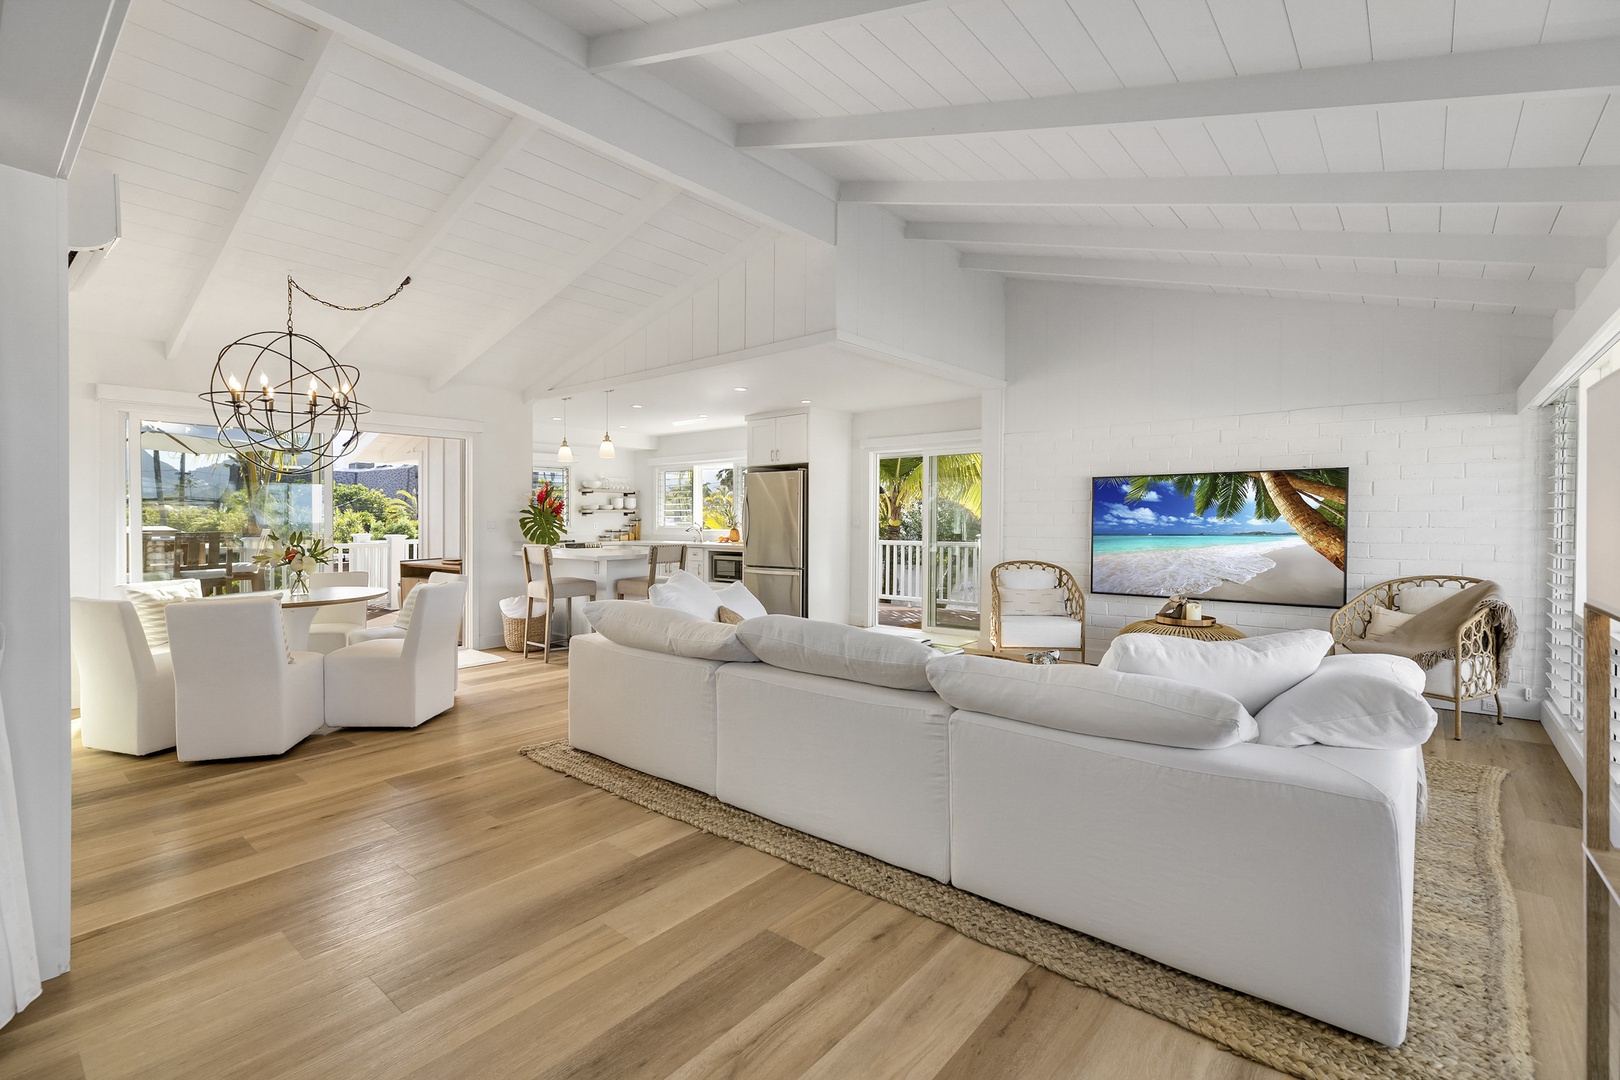 Kailua Vacation Rentals, Seahorse Beach House - Luxury meets openness in our front house living room, where an open floor plan invites relaxation and togetherness.